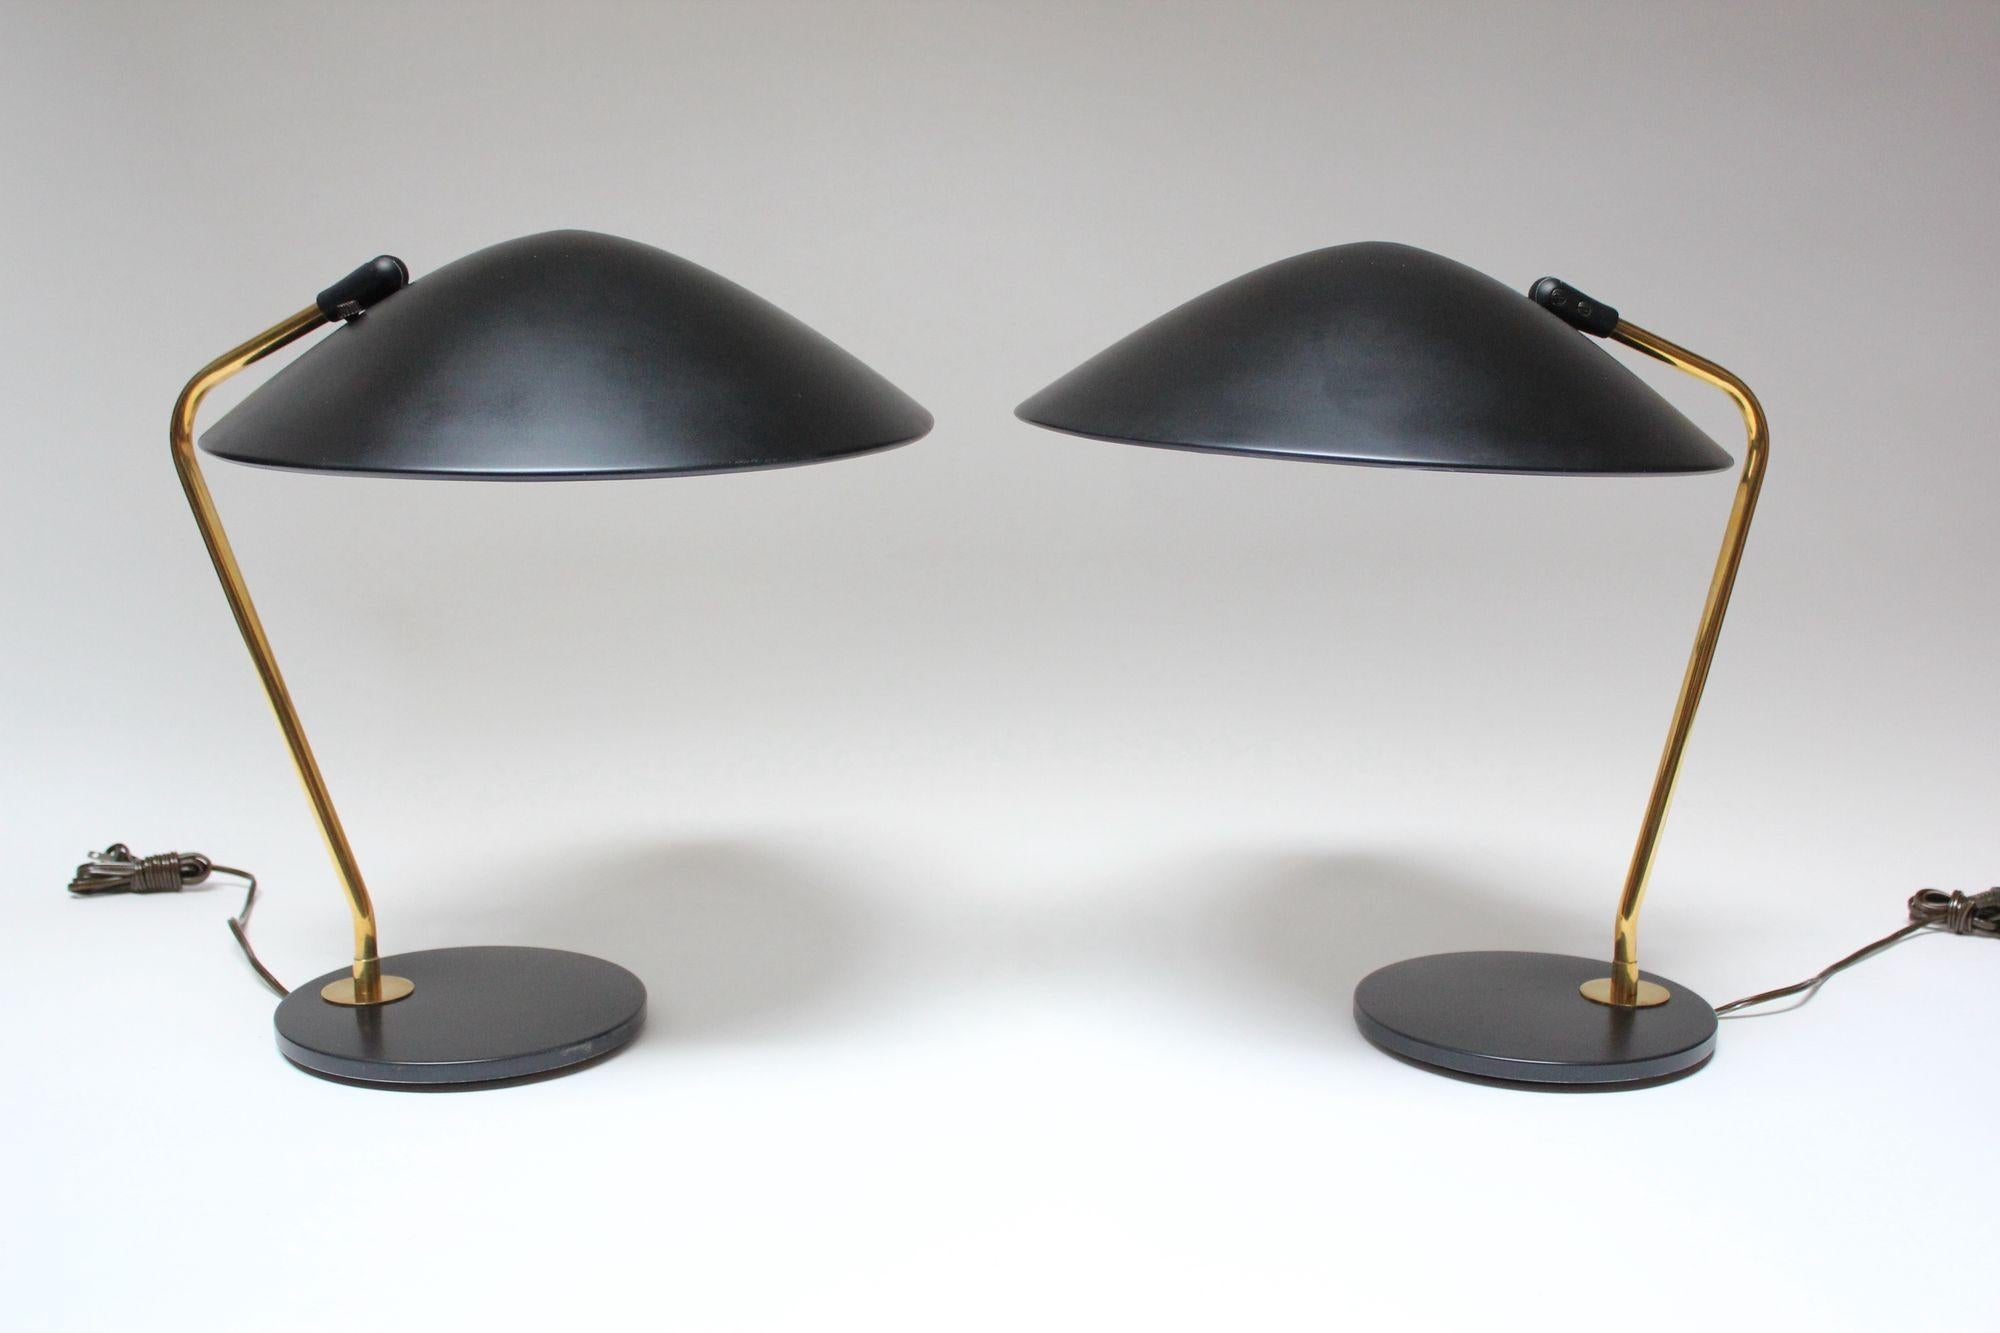 Pair of tables lamps designed by Gerald Thurston for Lightolier composed of oversized, fully-adjustable, black-metal shades and corresponding round bases with brass stems (ca. 1950s, USA).
Black paint has been conservatively touched up and brass is